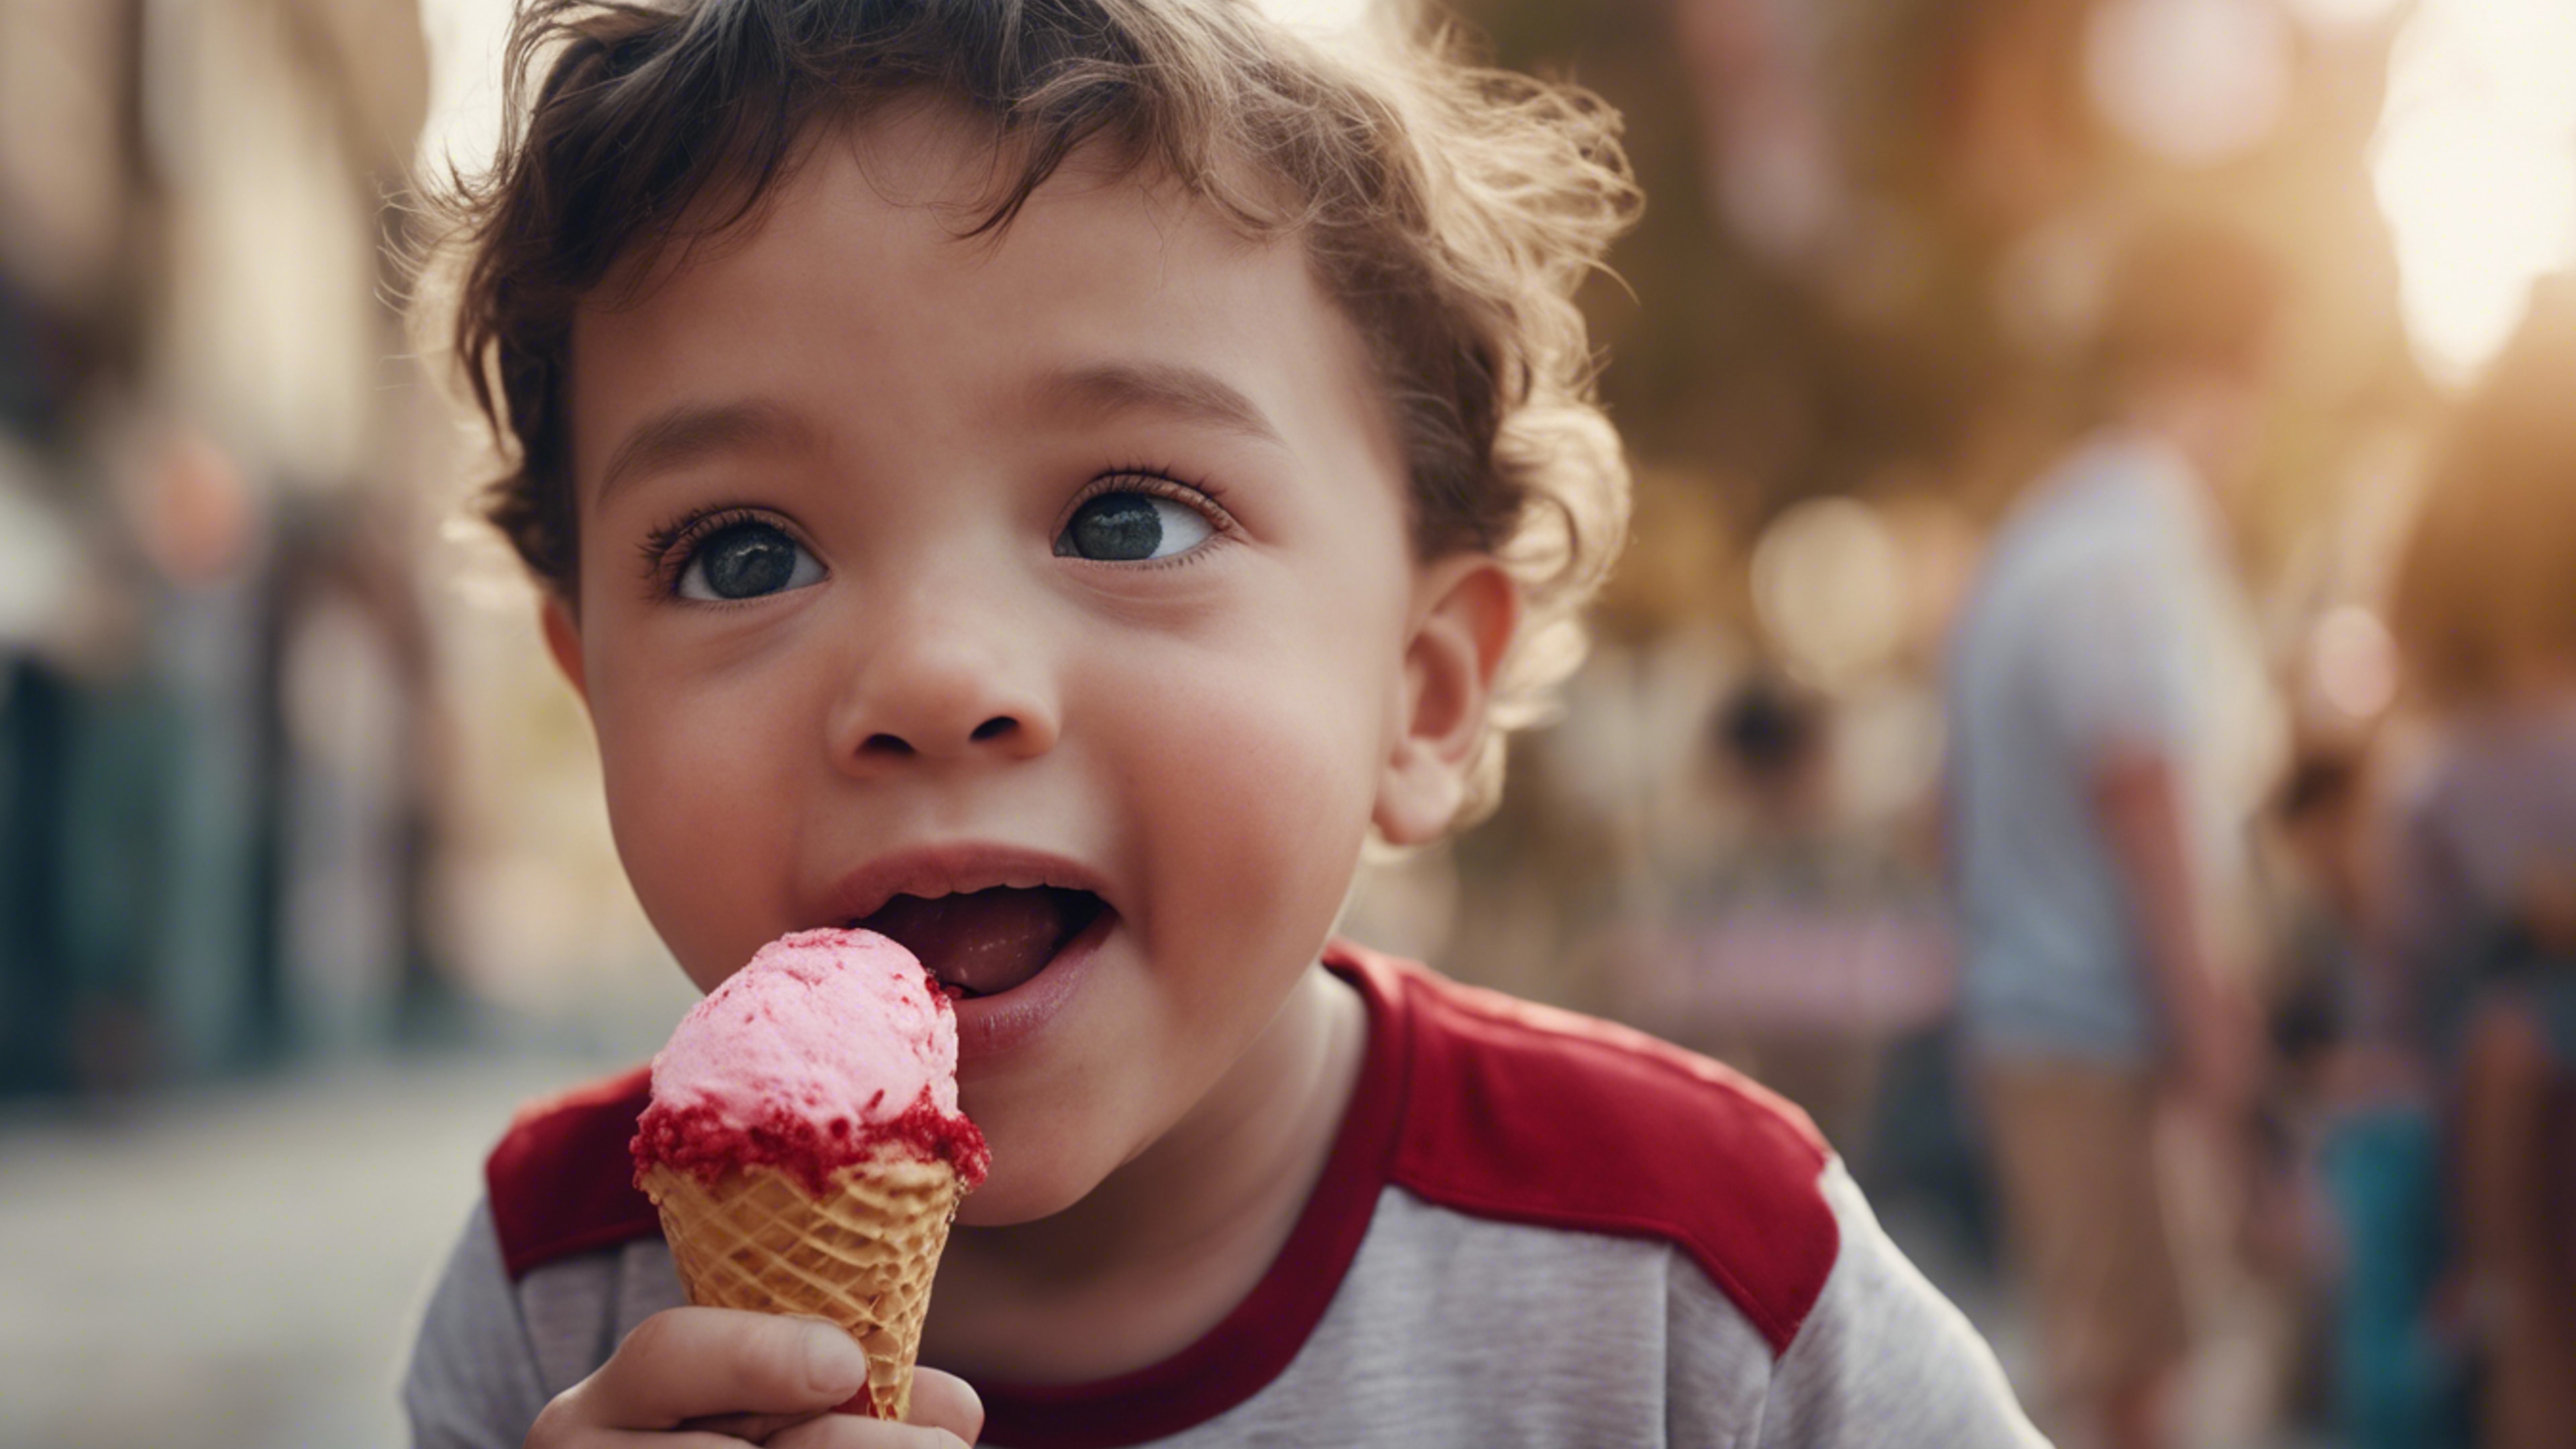 A small child delighting in a red velvet ice cream cone, with a wide-eyed expression of joy on his face. Tapet[7a3fbd1e60614c42931f]